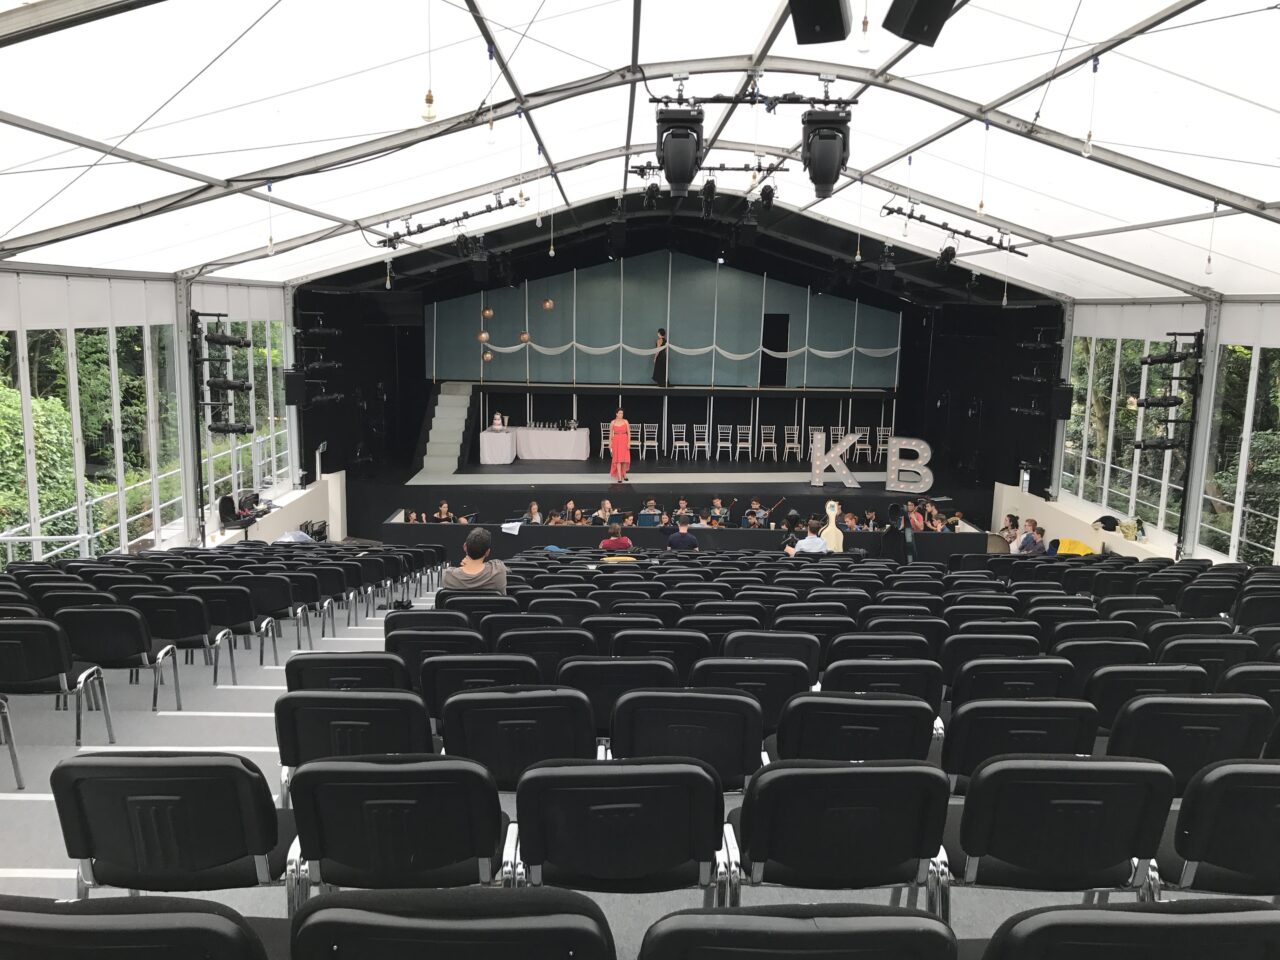 Temporary stage, auditorium and seating at West Green Opera, supplied by GL events UK